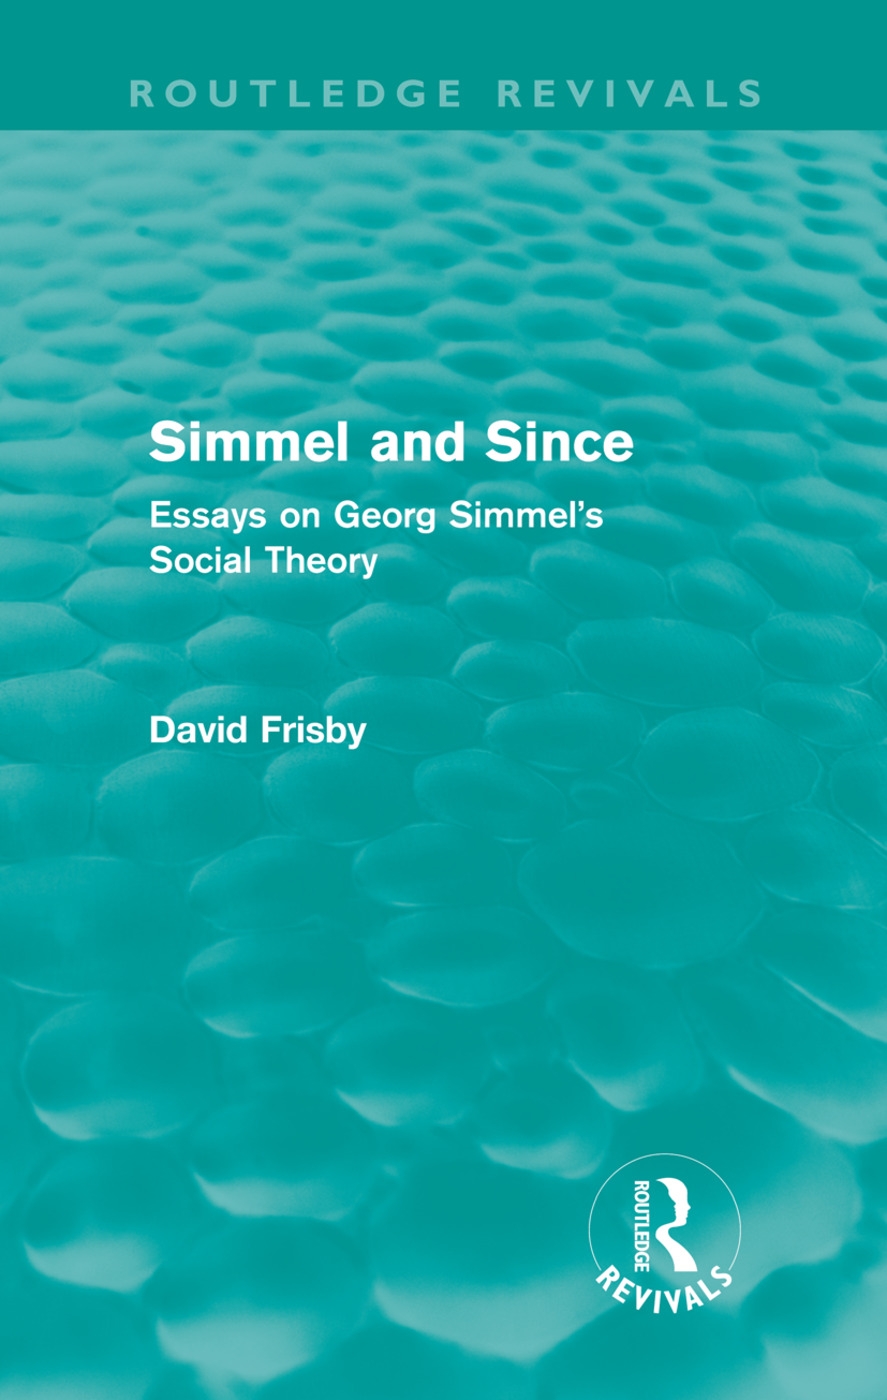 Simmel and Since: Essays on Georg Simmel’s Social Theory